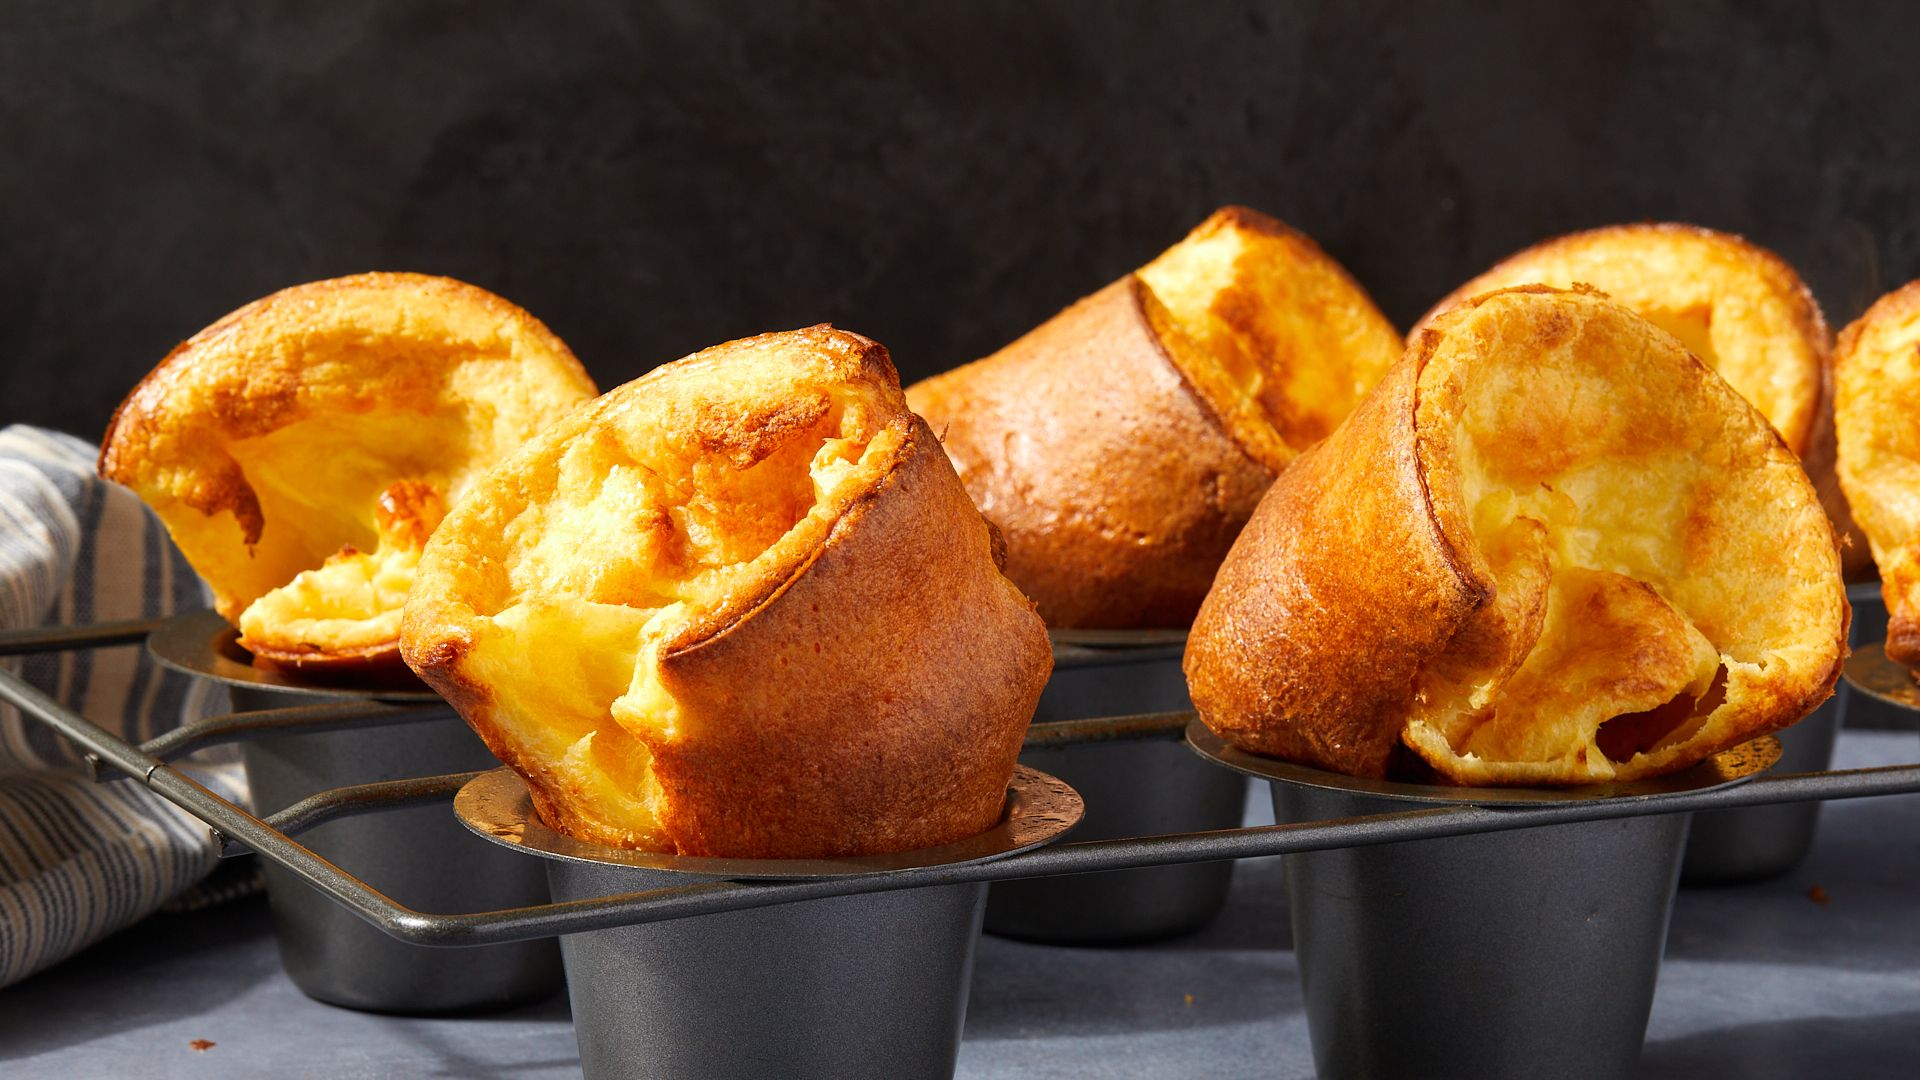 Best Yorkshire Pudding Recipe - How To Make Yorkshire Pudding